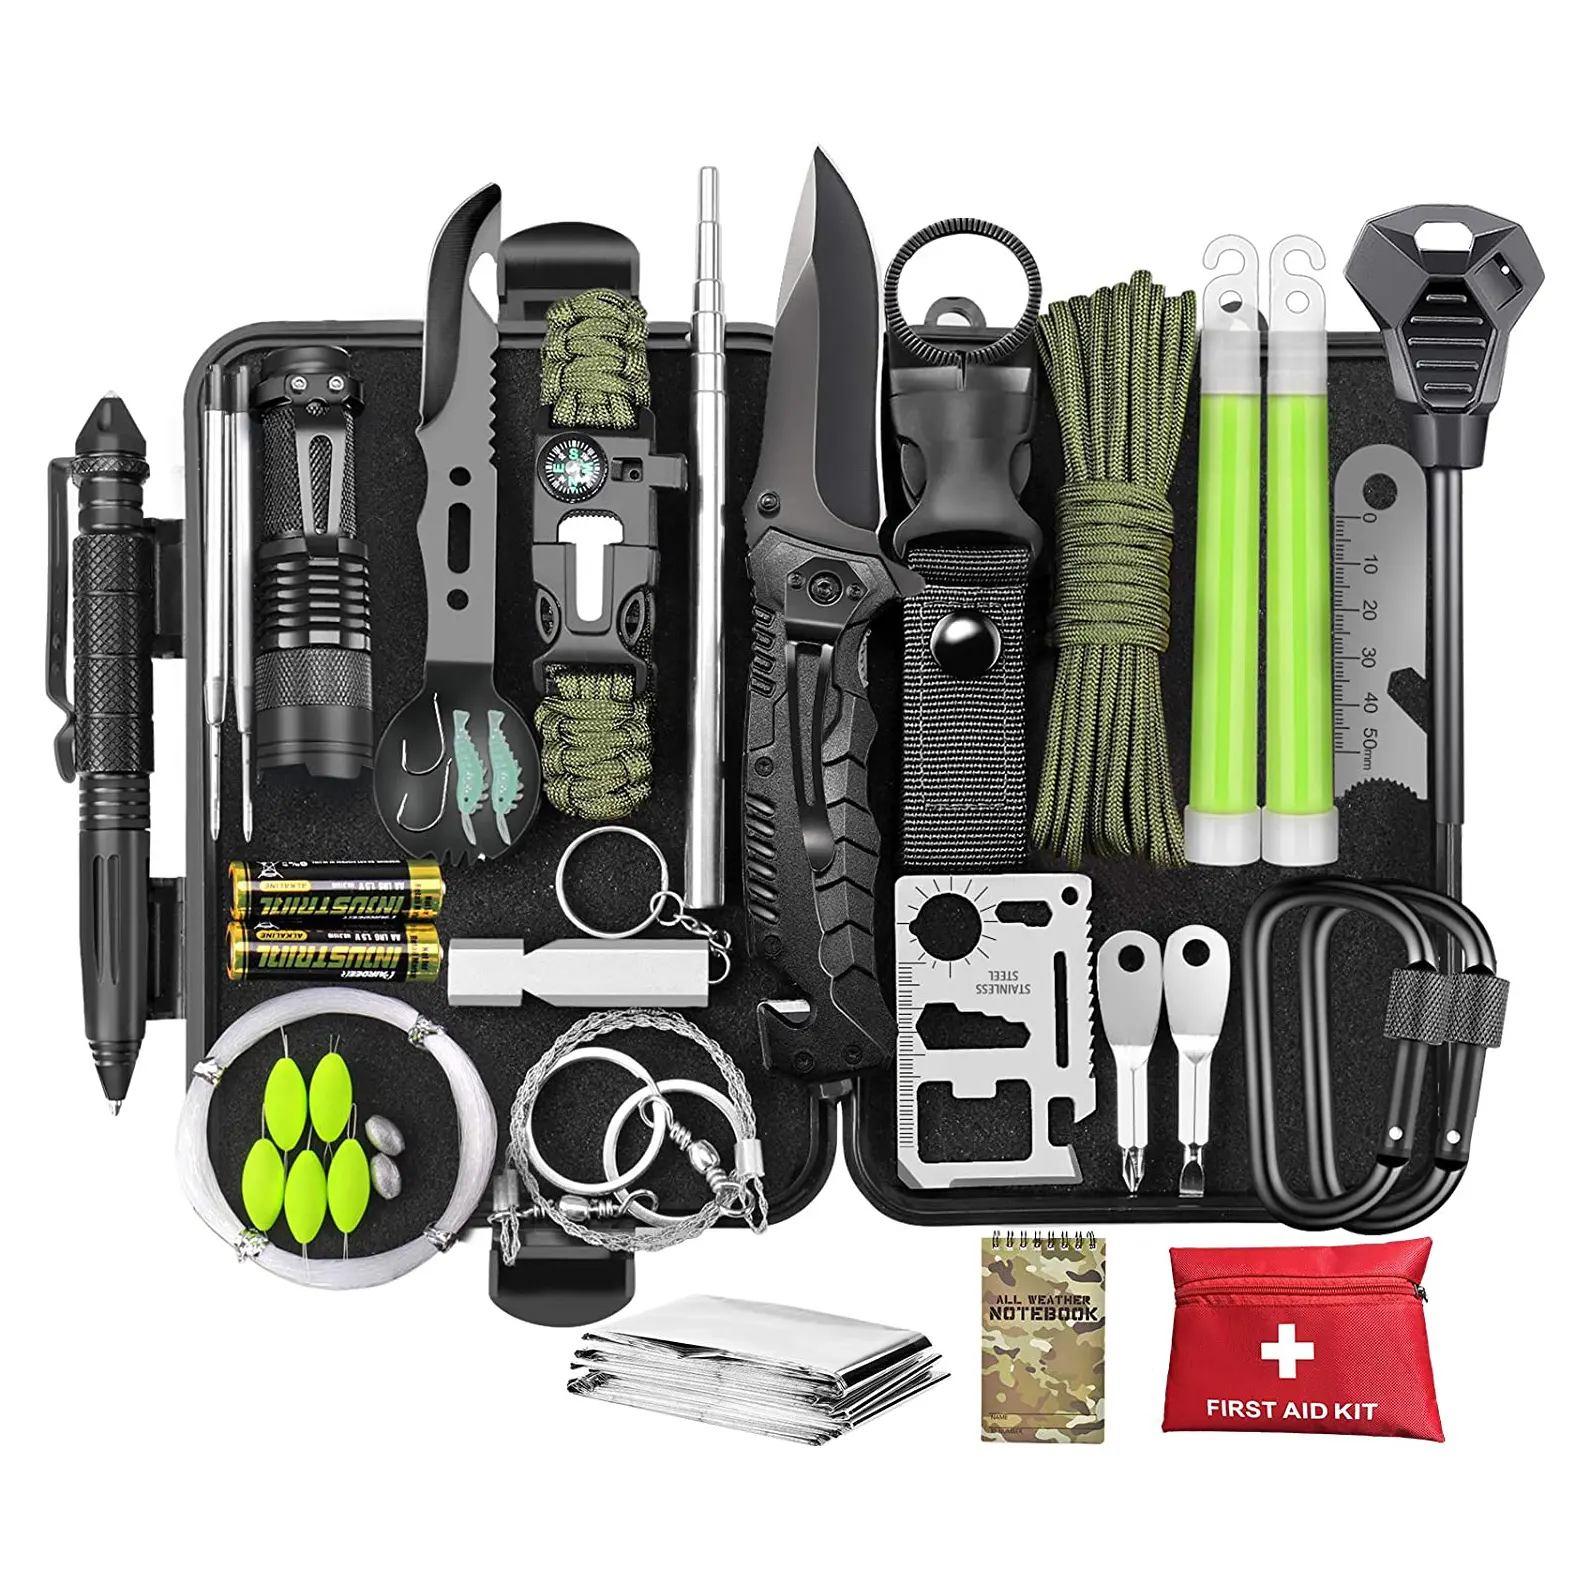 Cool Gadgets Birthday Gifts Survival Kit 73 in 1, Emergency Survival Gear and Equipment First Aid Kit SOS EDC Survival Tools